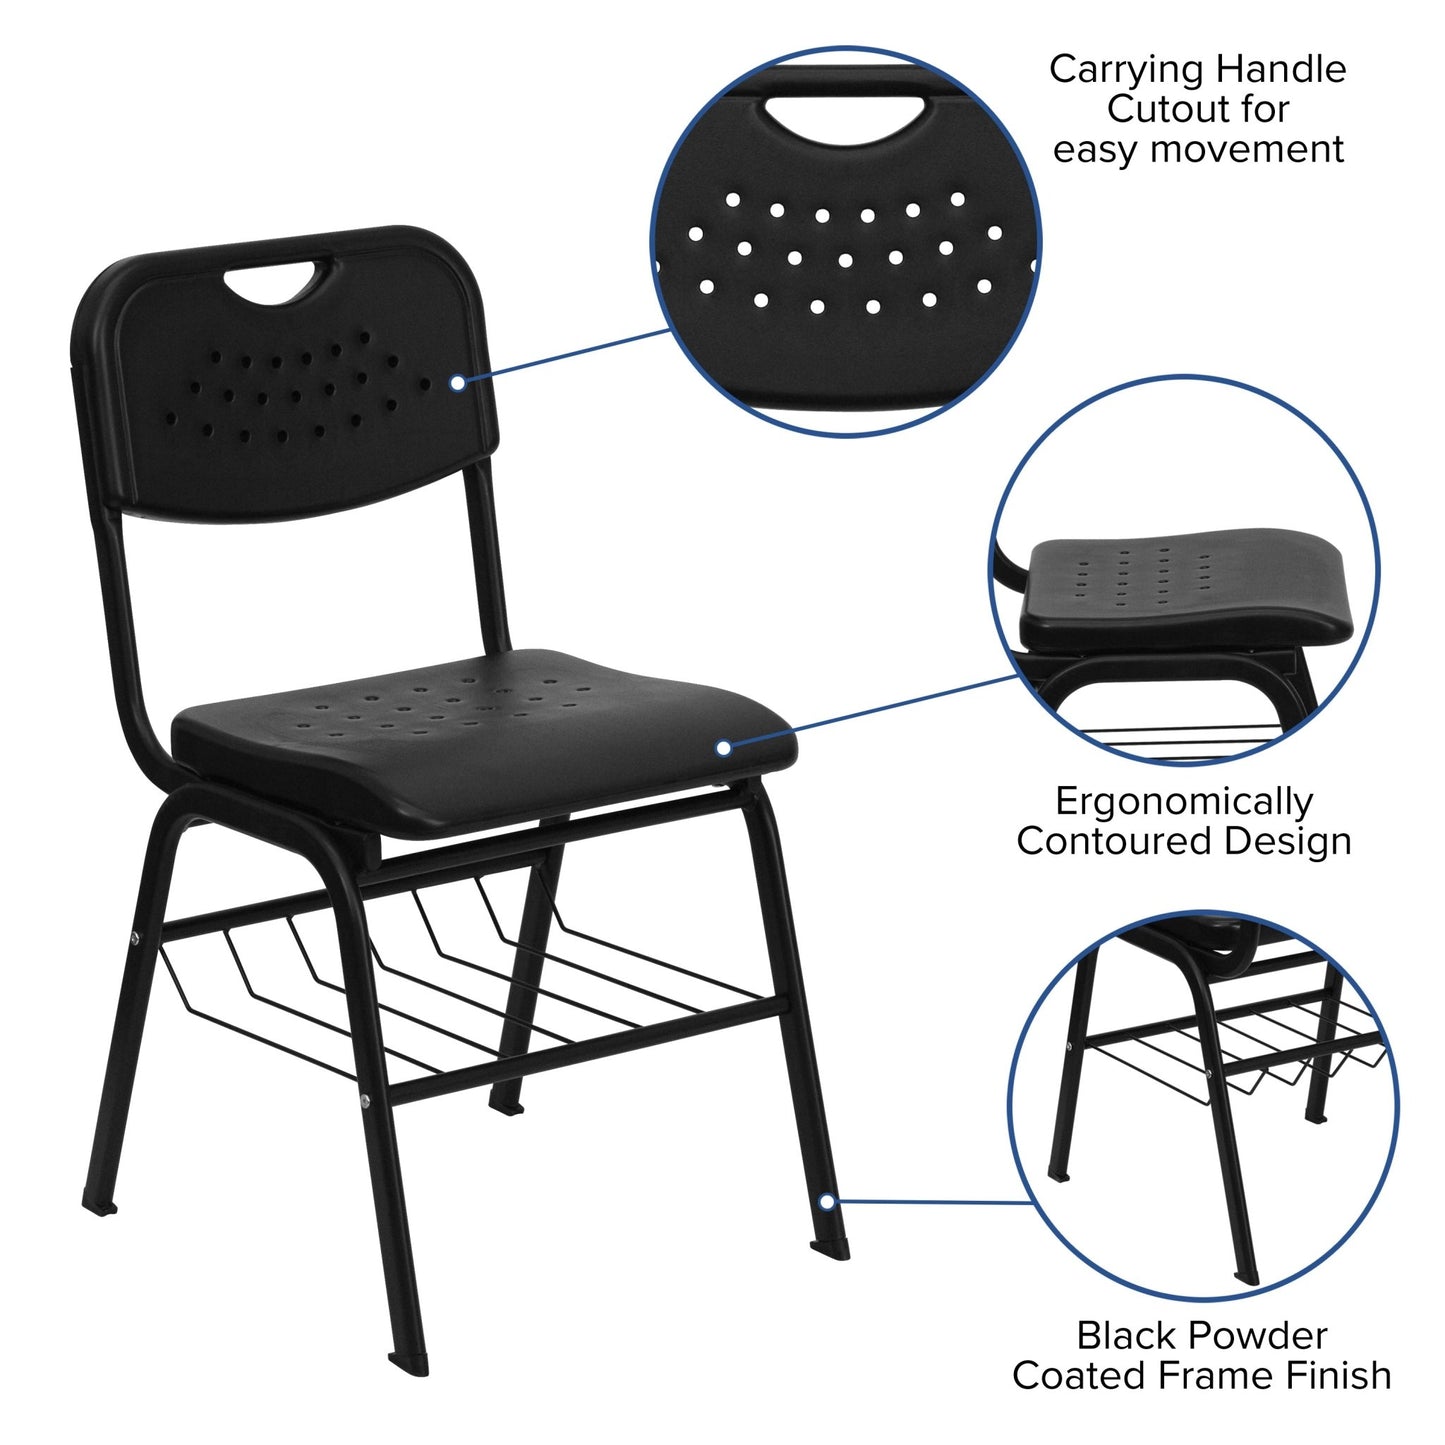 HERCULES Series 880 lb. Capacity Black Plastic Chair with Black Frame and Book Basket - SchoolOutlet